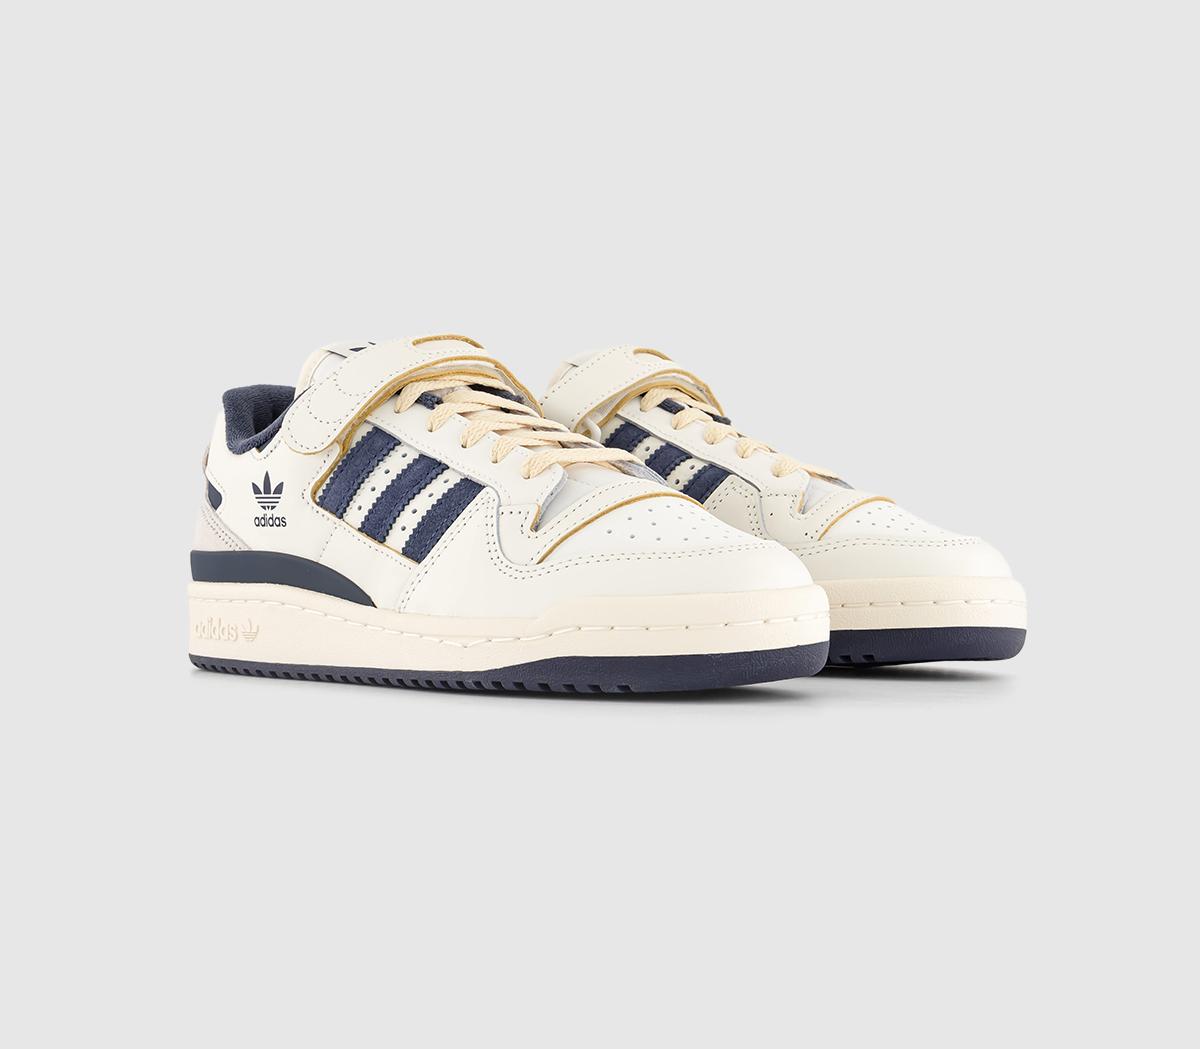 Adidas Womens Forum 84 Low Trainers Offwhite Shadow Navy Cream White, 8